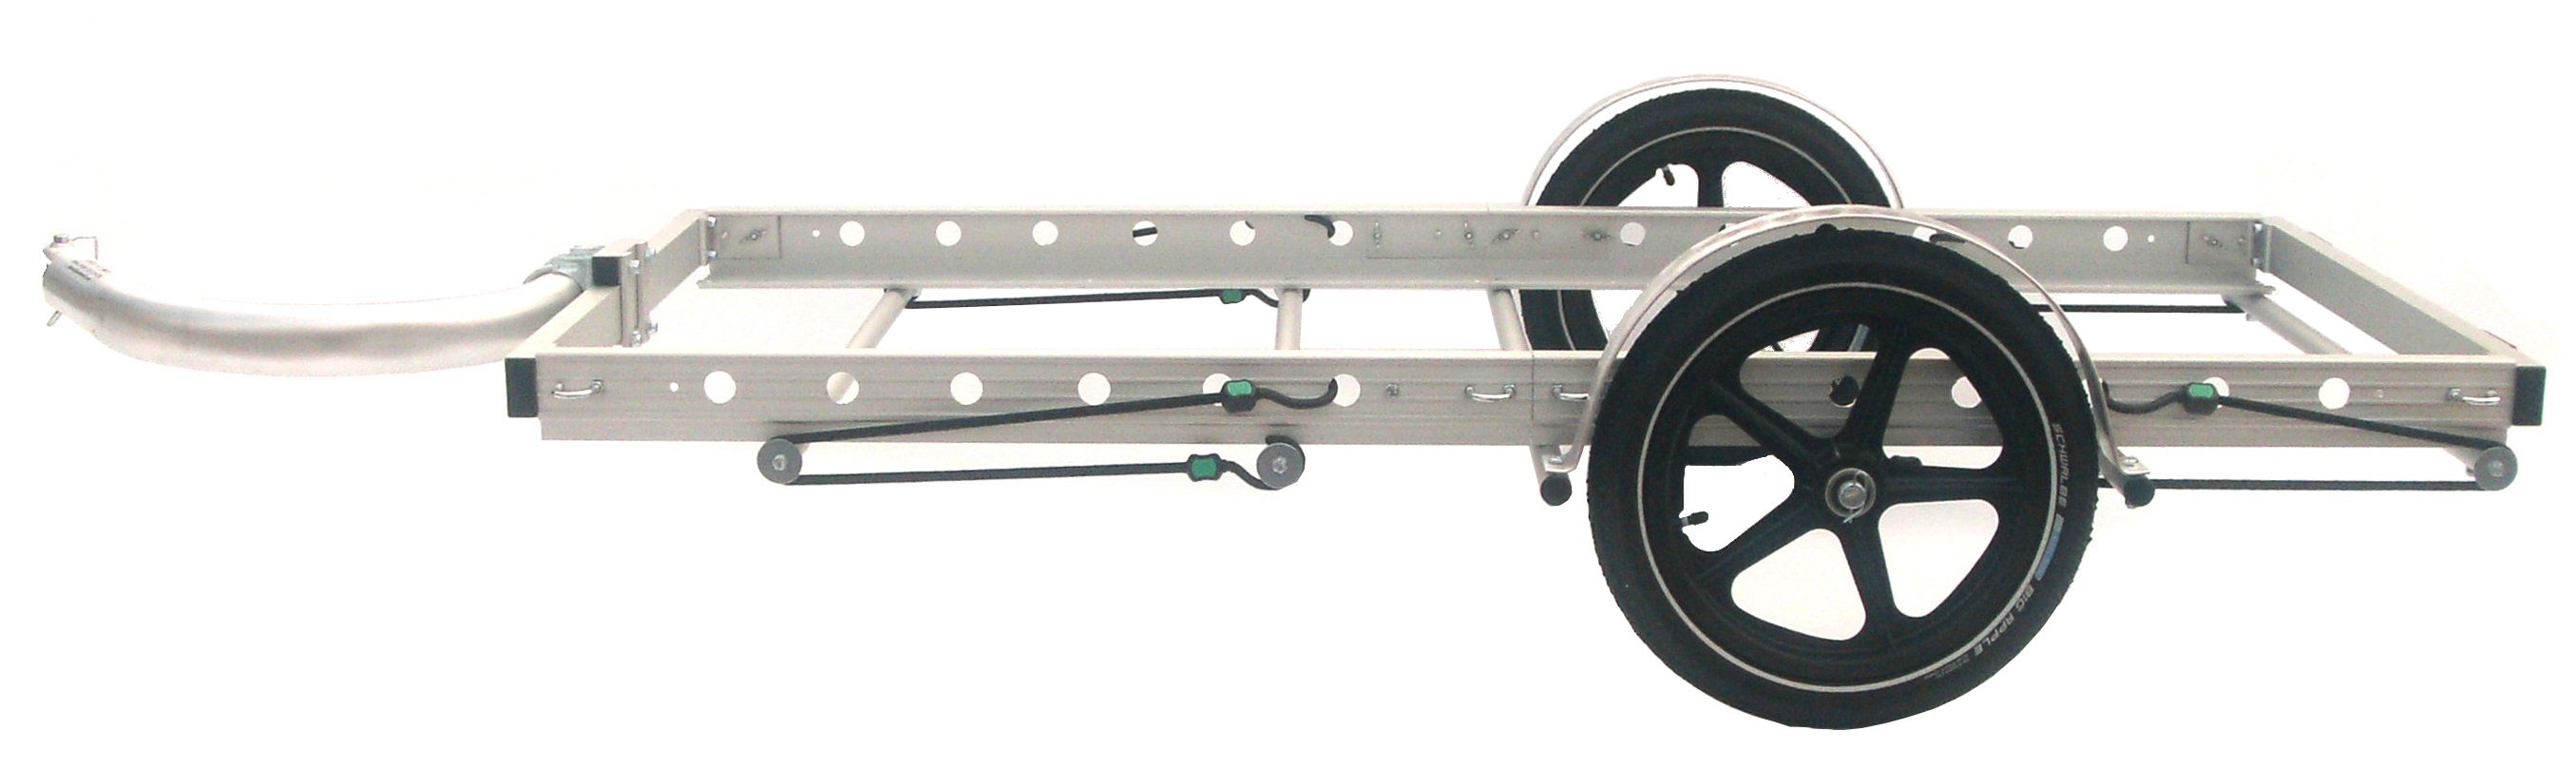 bicycle trailer parts